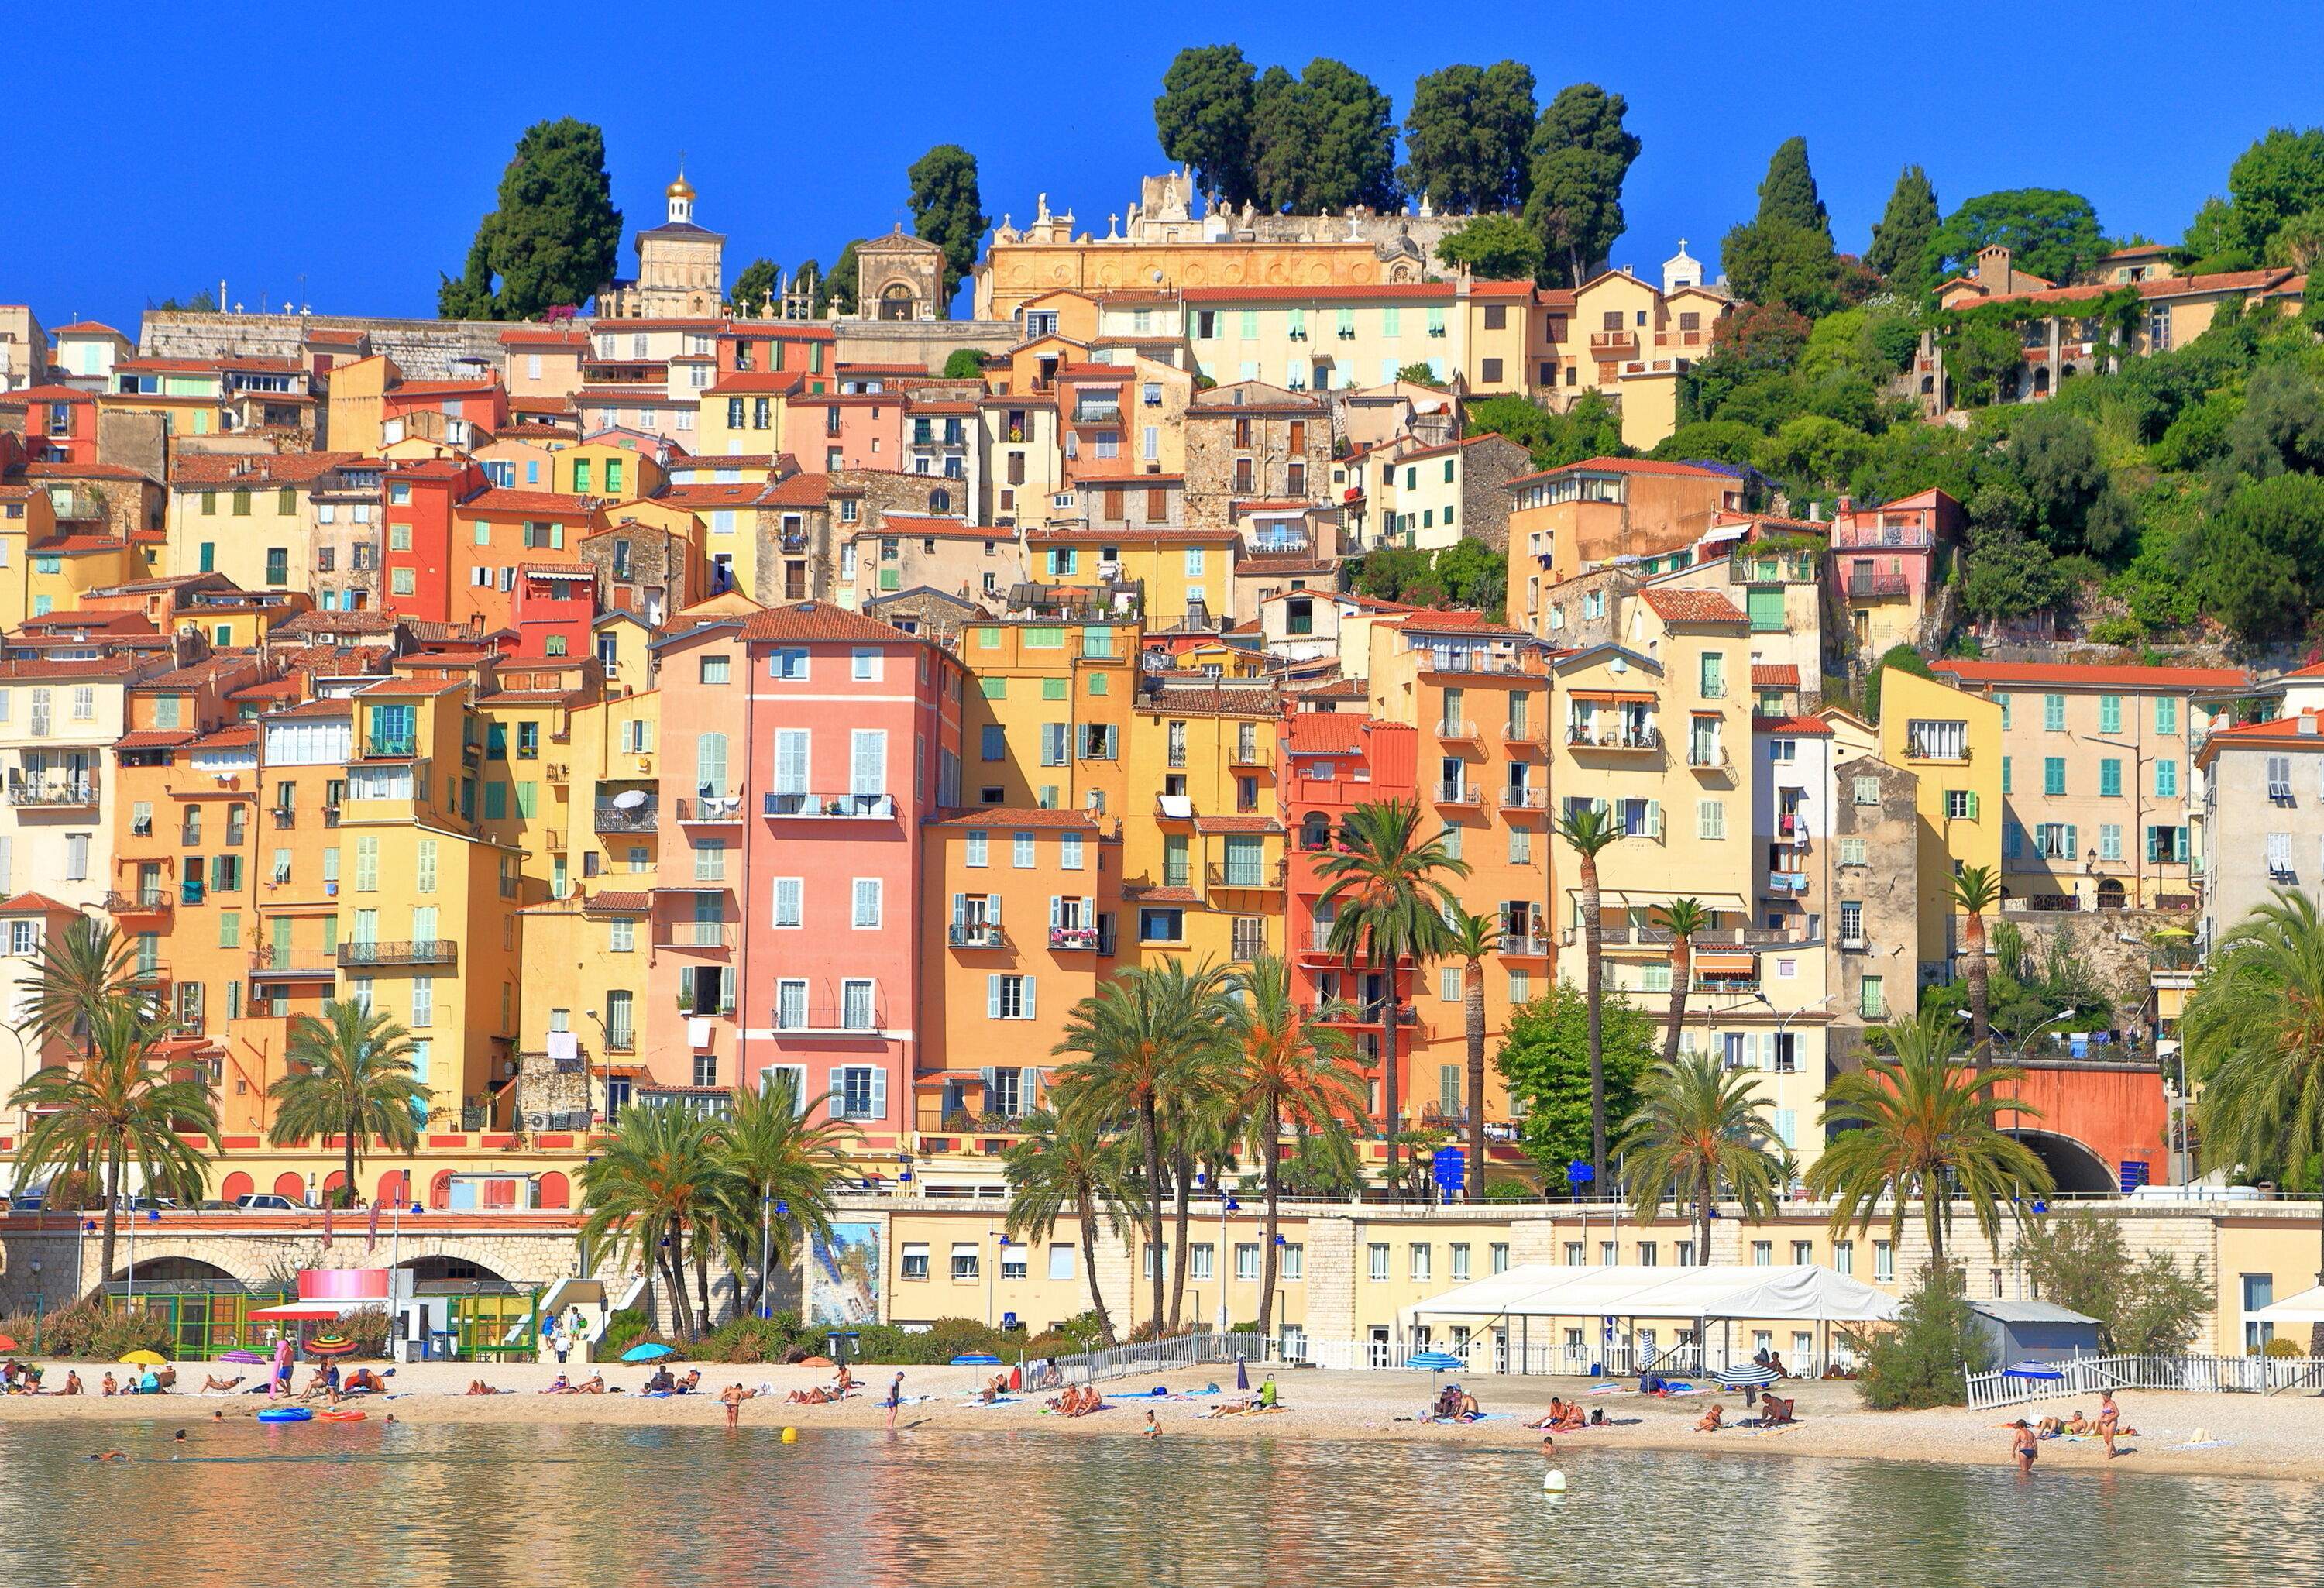 A picturesque medieval town by the beach with colourful buildings situated on a hill.